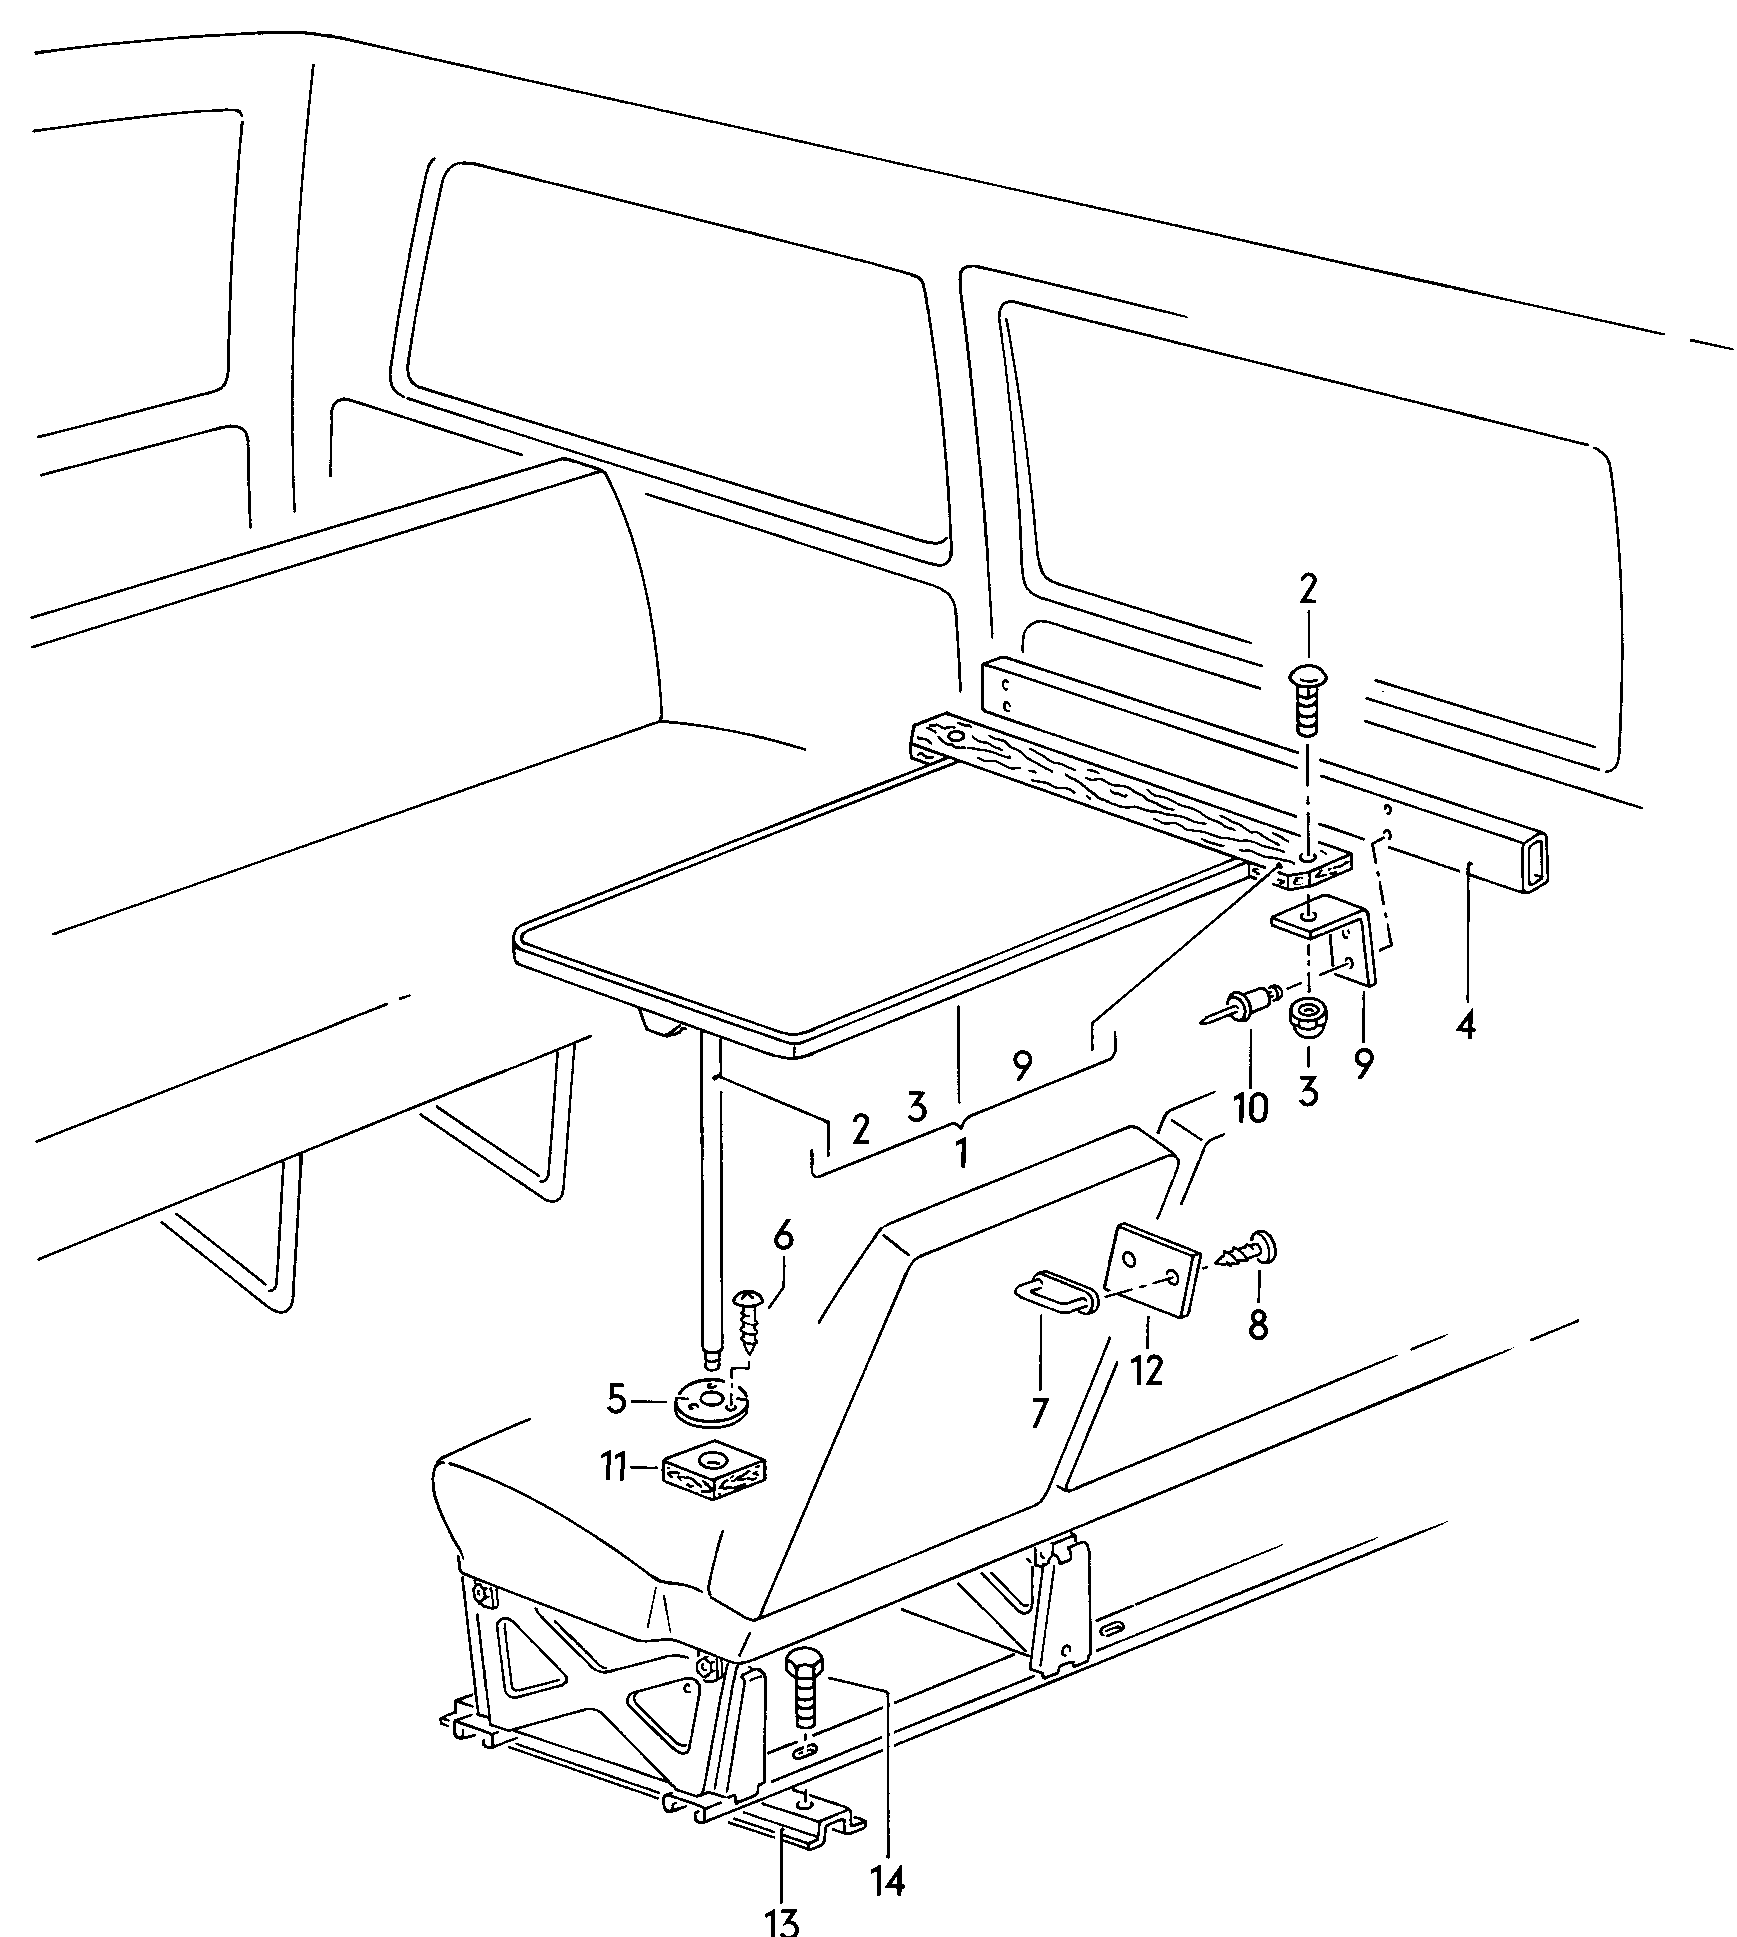 folding table and front<br>bench seat mounting in<br>passenger compartment  - Typ 2/syncro - t2